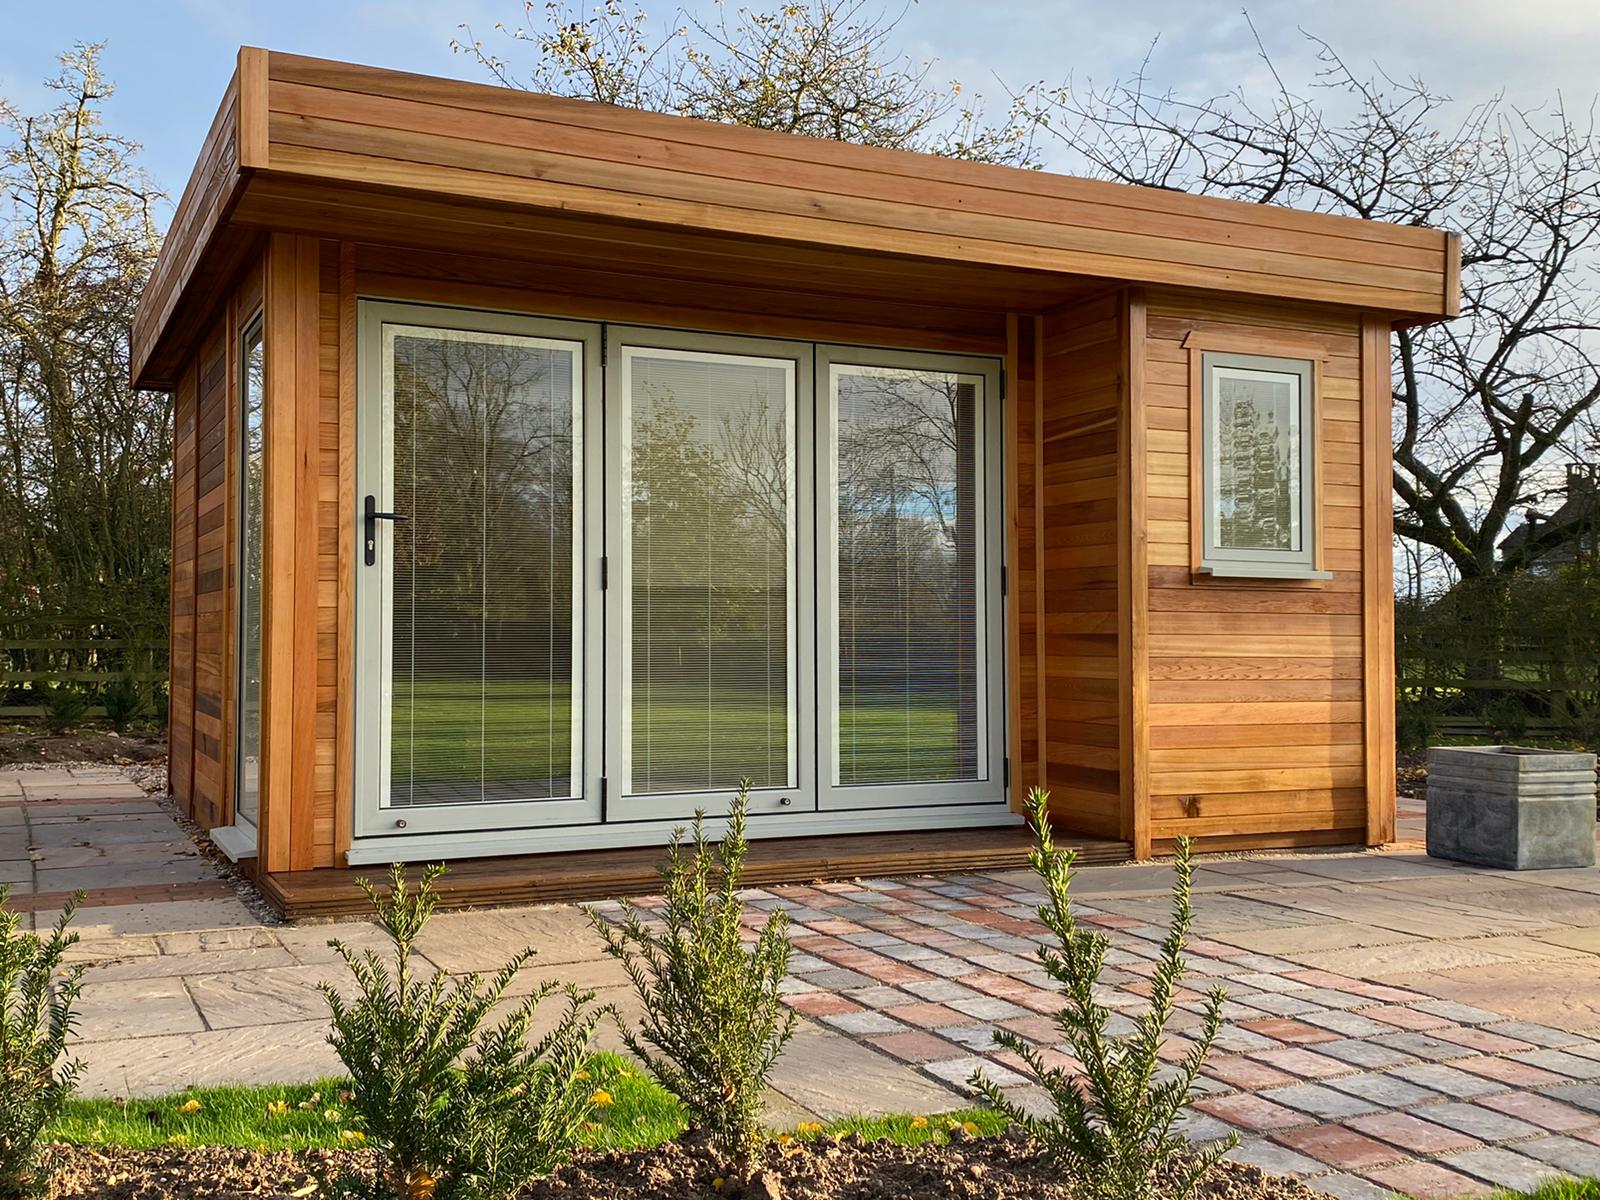 The Future of Remote Work – How Garden Offices Are Shaping the Way We Work